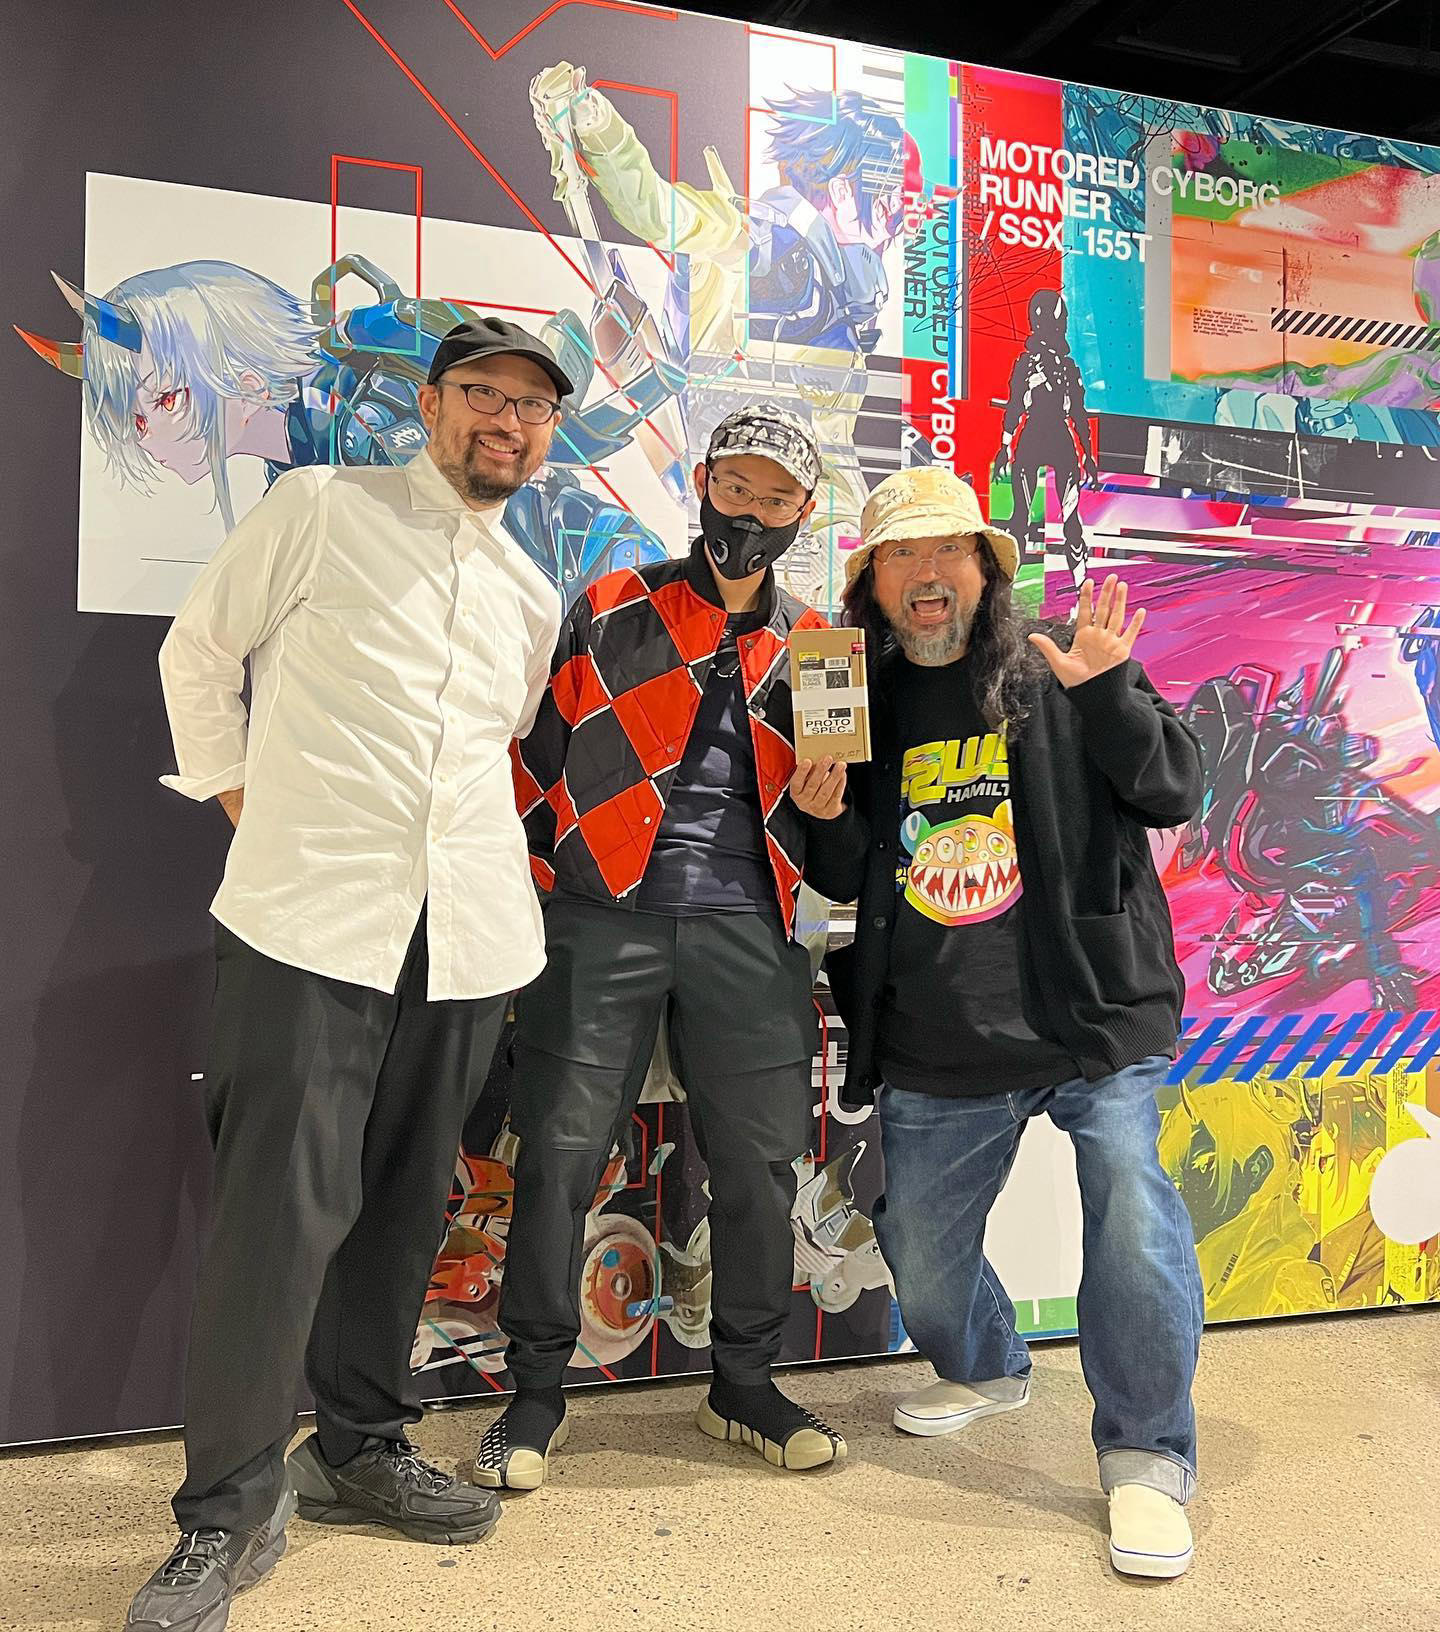 Takashi Murakami - I heard that the new project the designer who has helped me with various projects